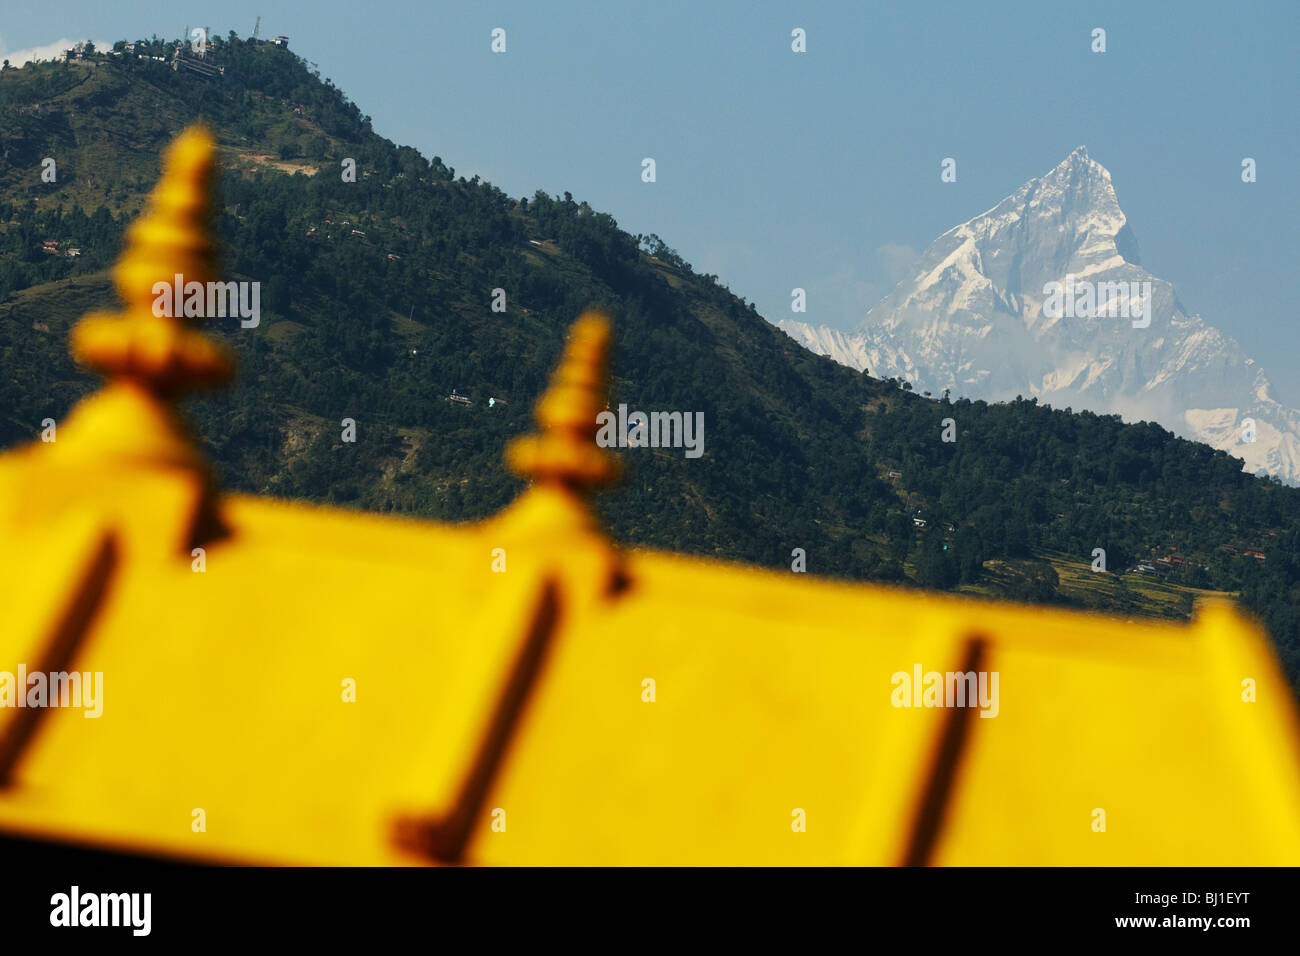 View of Fishtail mountain in Pokhara, Nepal on Monday October 26, 2009. Stock Photo